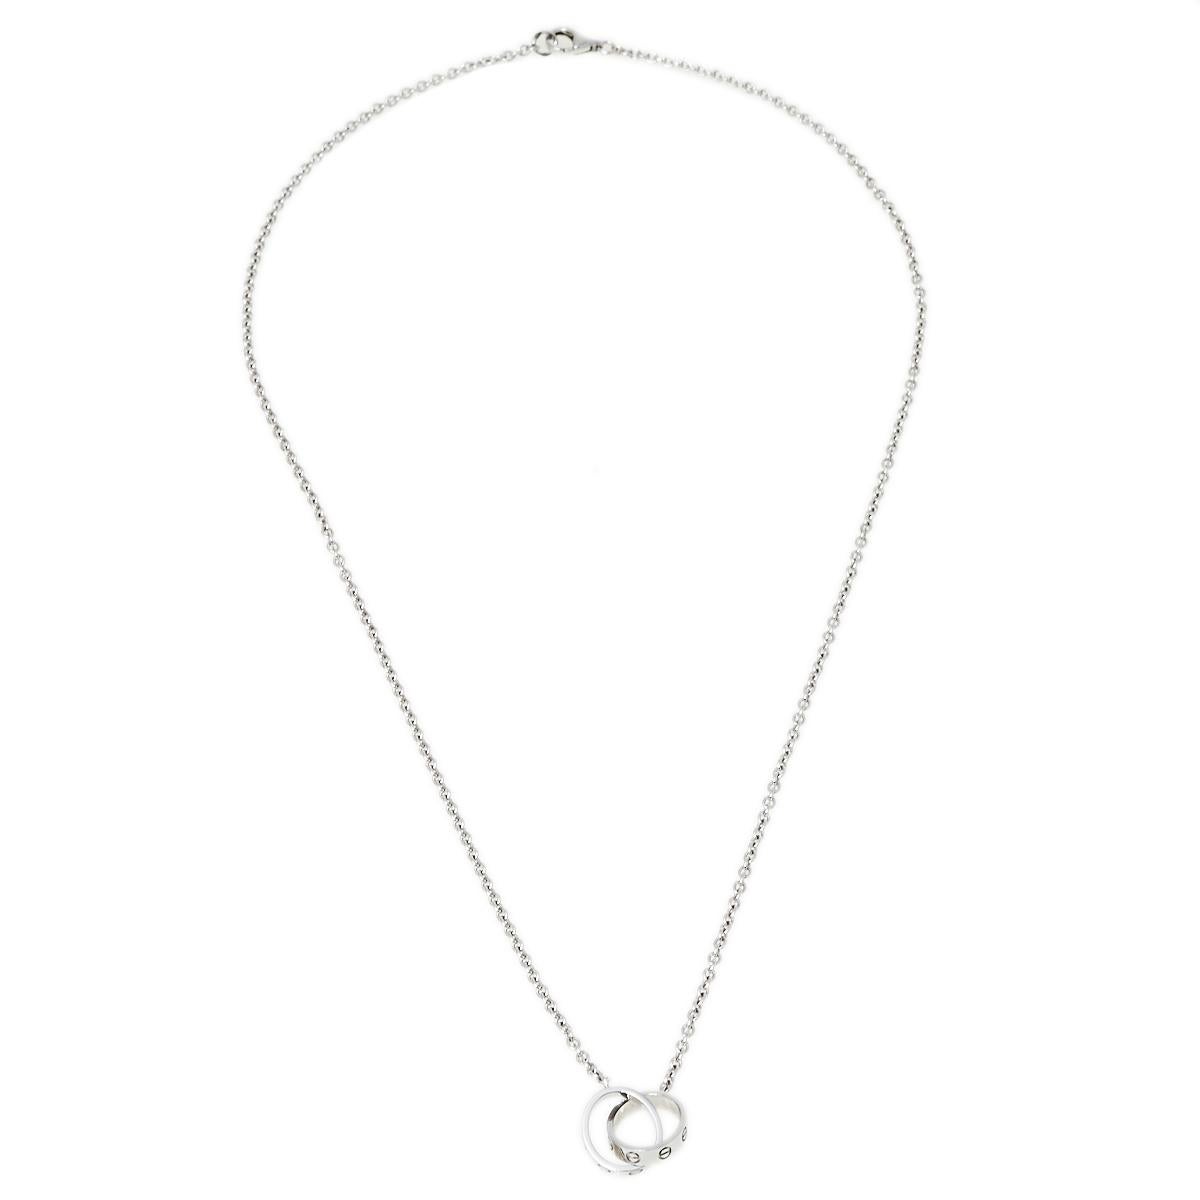 Celebrate timeless love with this necklace from Cartier's Love collection. It is made from 18k white gold and the chain holds two magnificent hoops interlocked with one another. Both the rings carry the iconic screw motifs which are a signature of